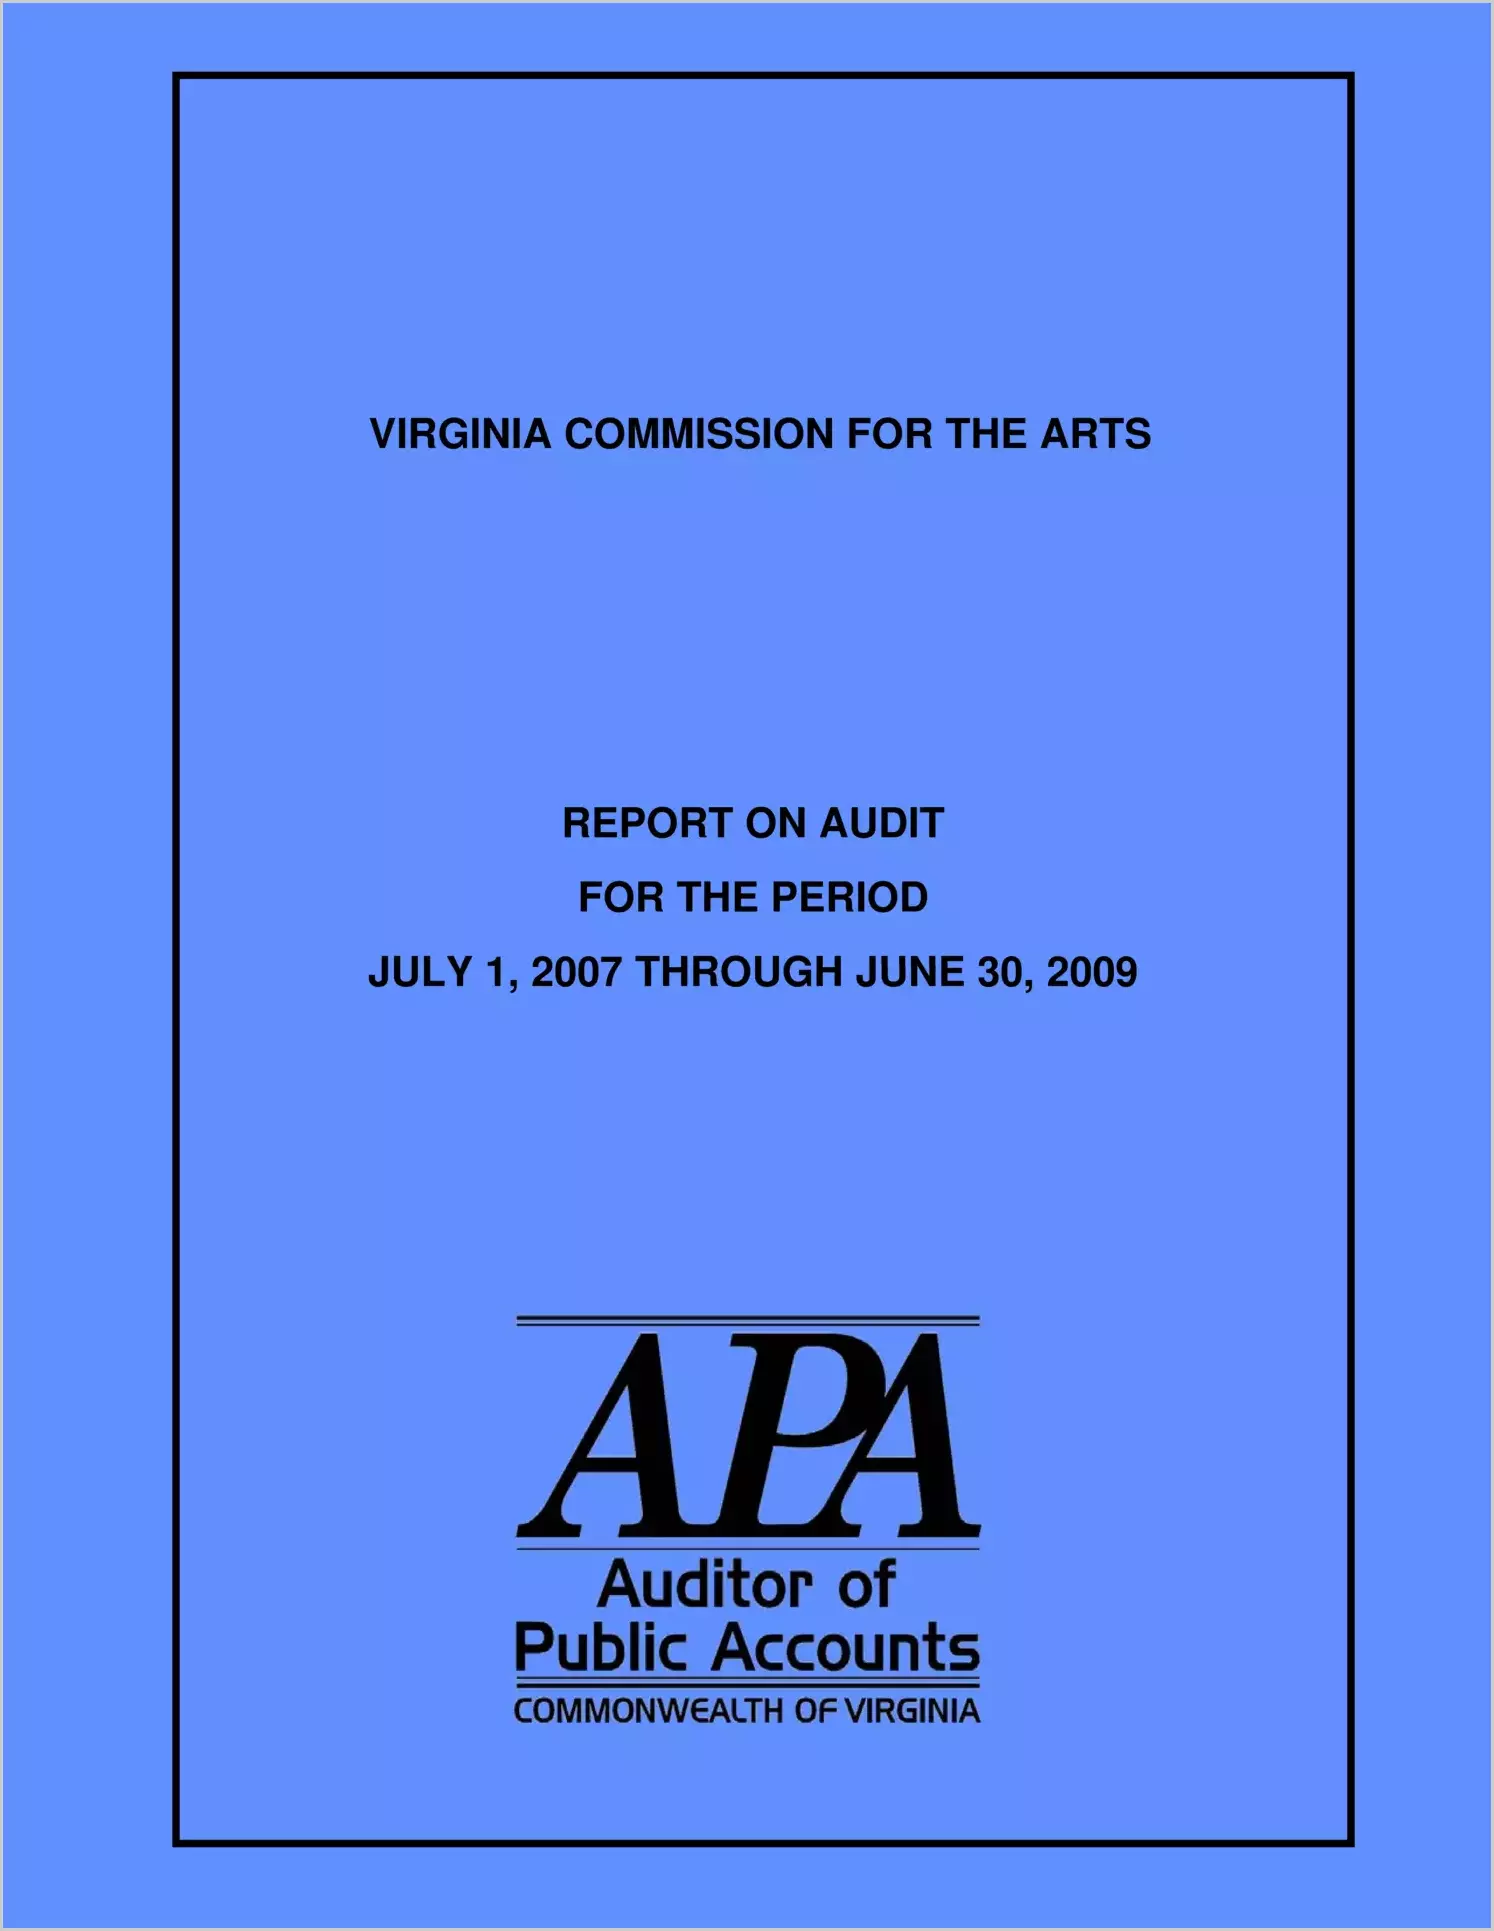 Virginia Commission for the Arts report on audit for the period July 1, 2007 through June 30, 2009